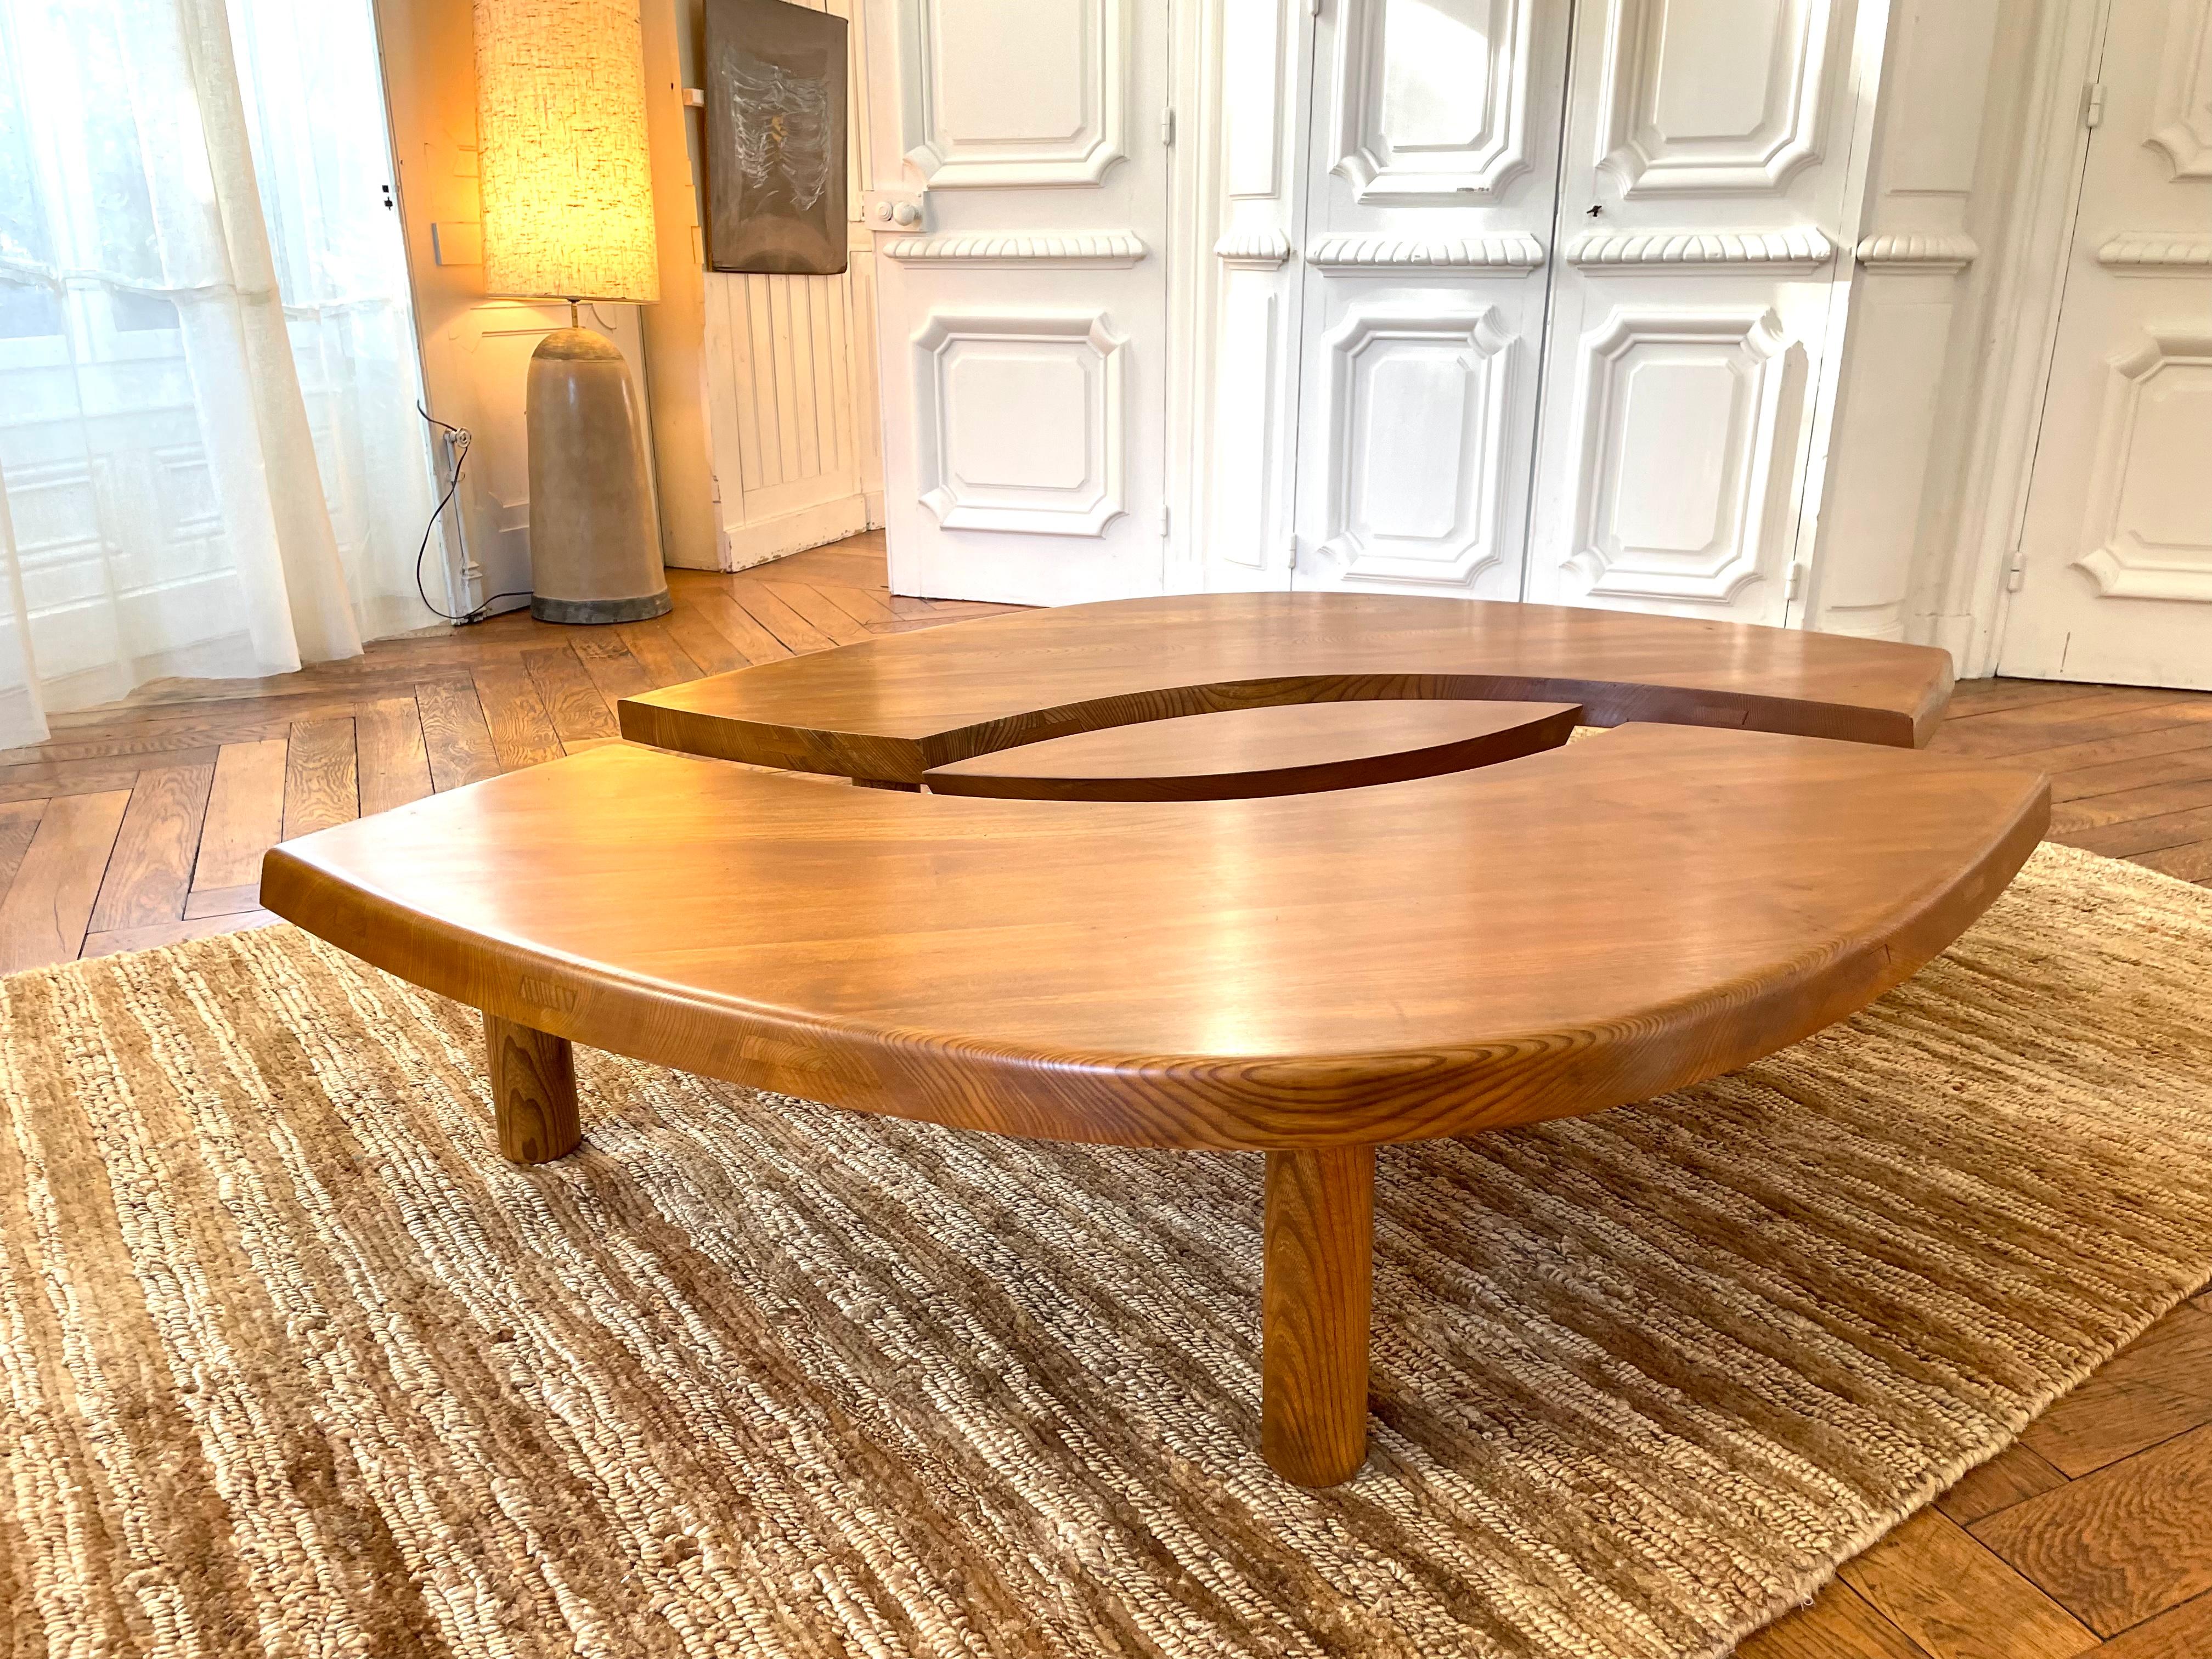 Coffee table model T 22 S French solid elm By. Pierre Chapo workshops In Gordes ( Vaucluse France) And 1 first édition 1972. 
Measures: H 34 cm, L 175 cm, P 126 cm. Bel state Of use.